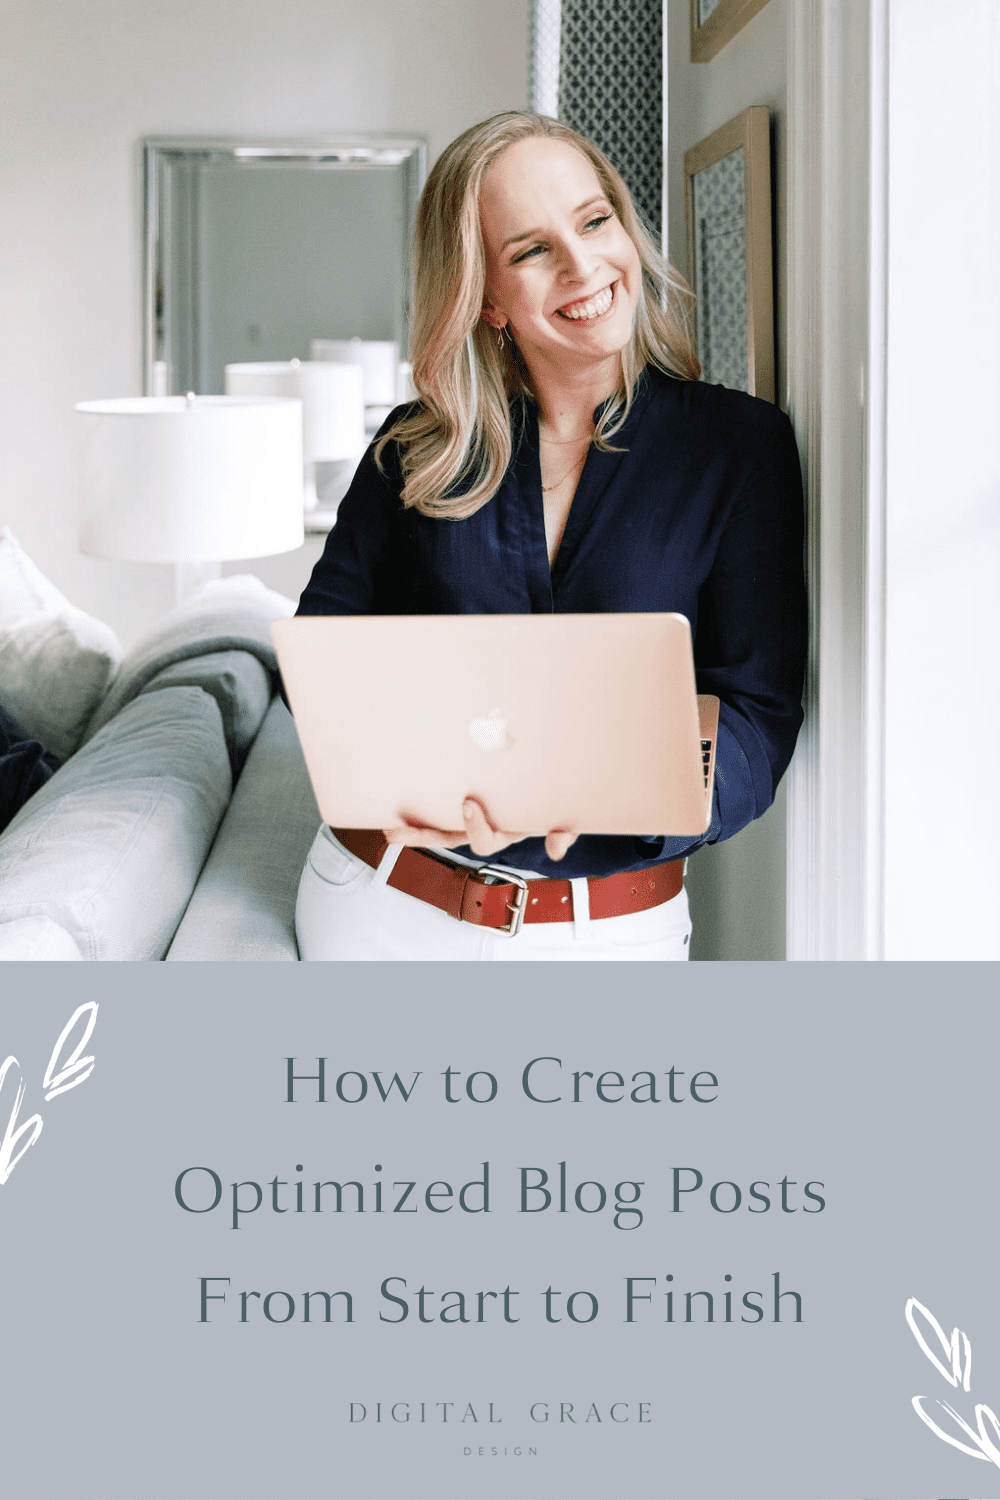 How to Create Optimized Blog Posts From Start to Finish